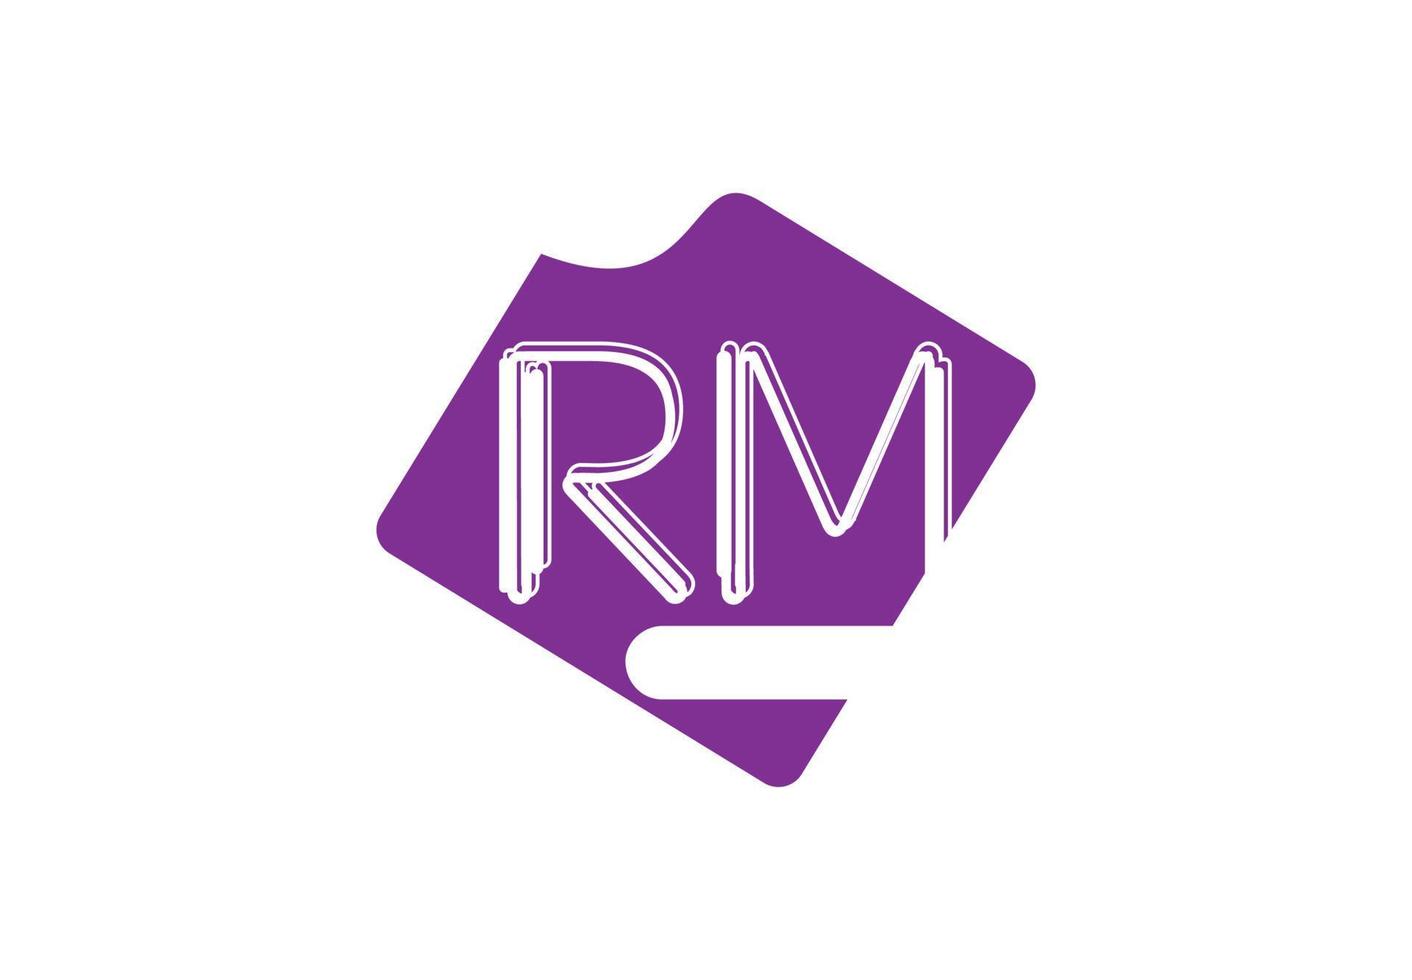 RM letter logo and icon design template vector